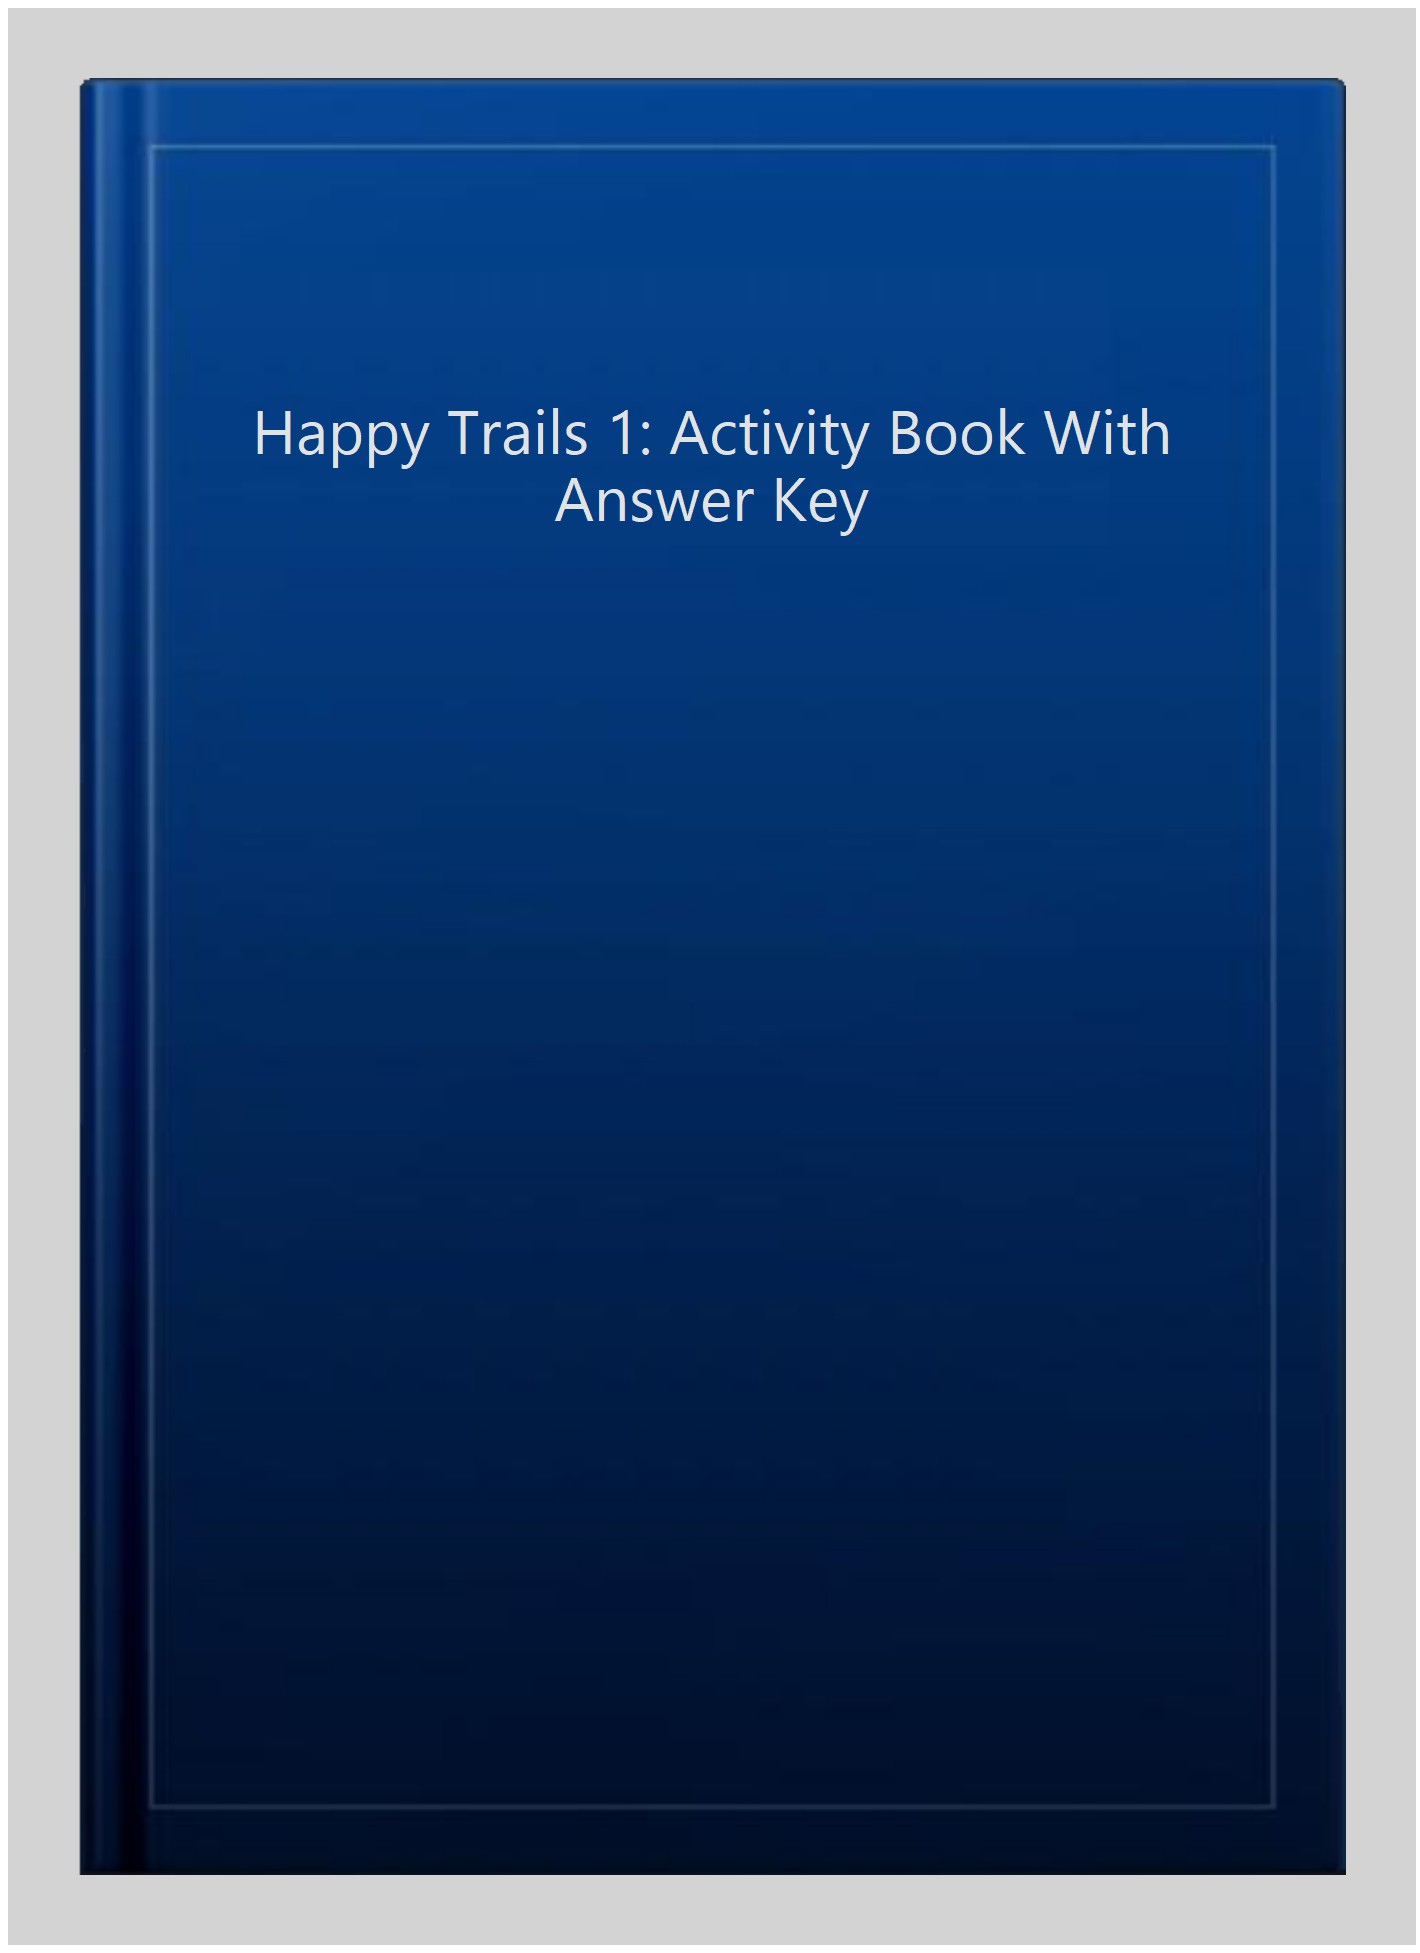 Happy Trails 1: Activity Book With Answer Key